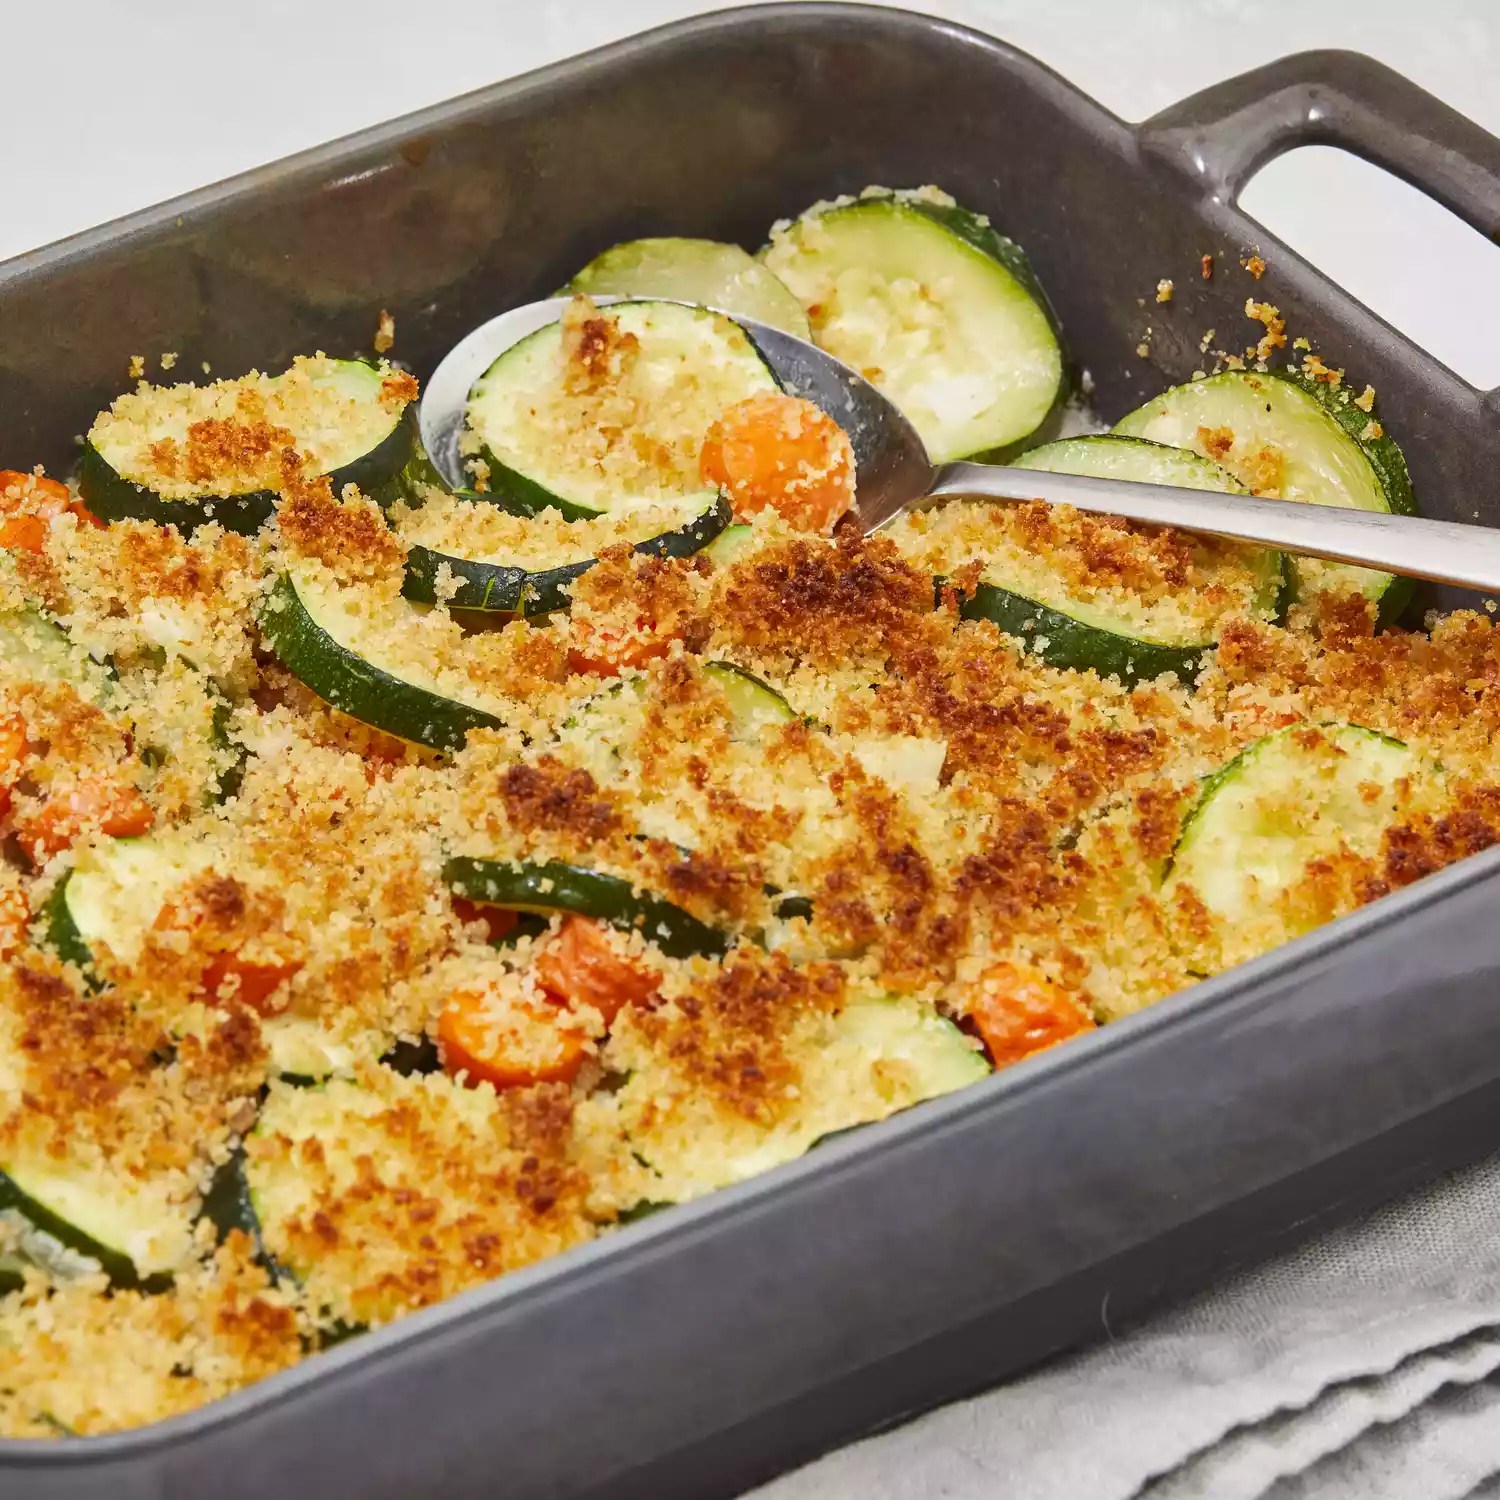 Epic Carrot-Zucchini Bake: Happiness in a Dish!